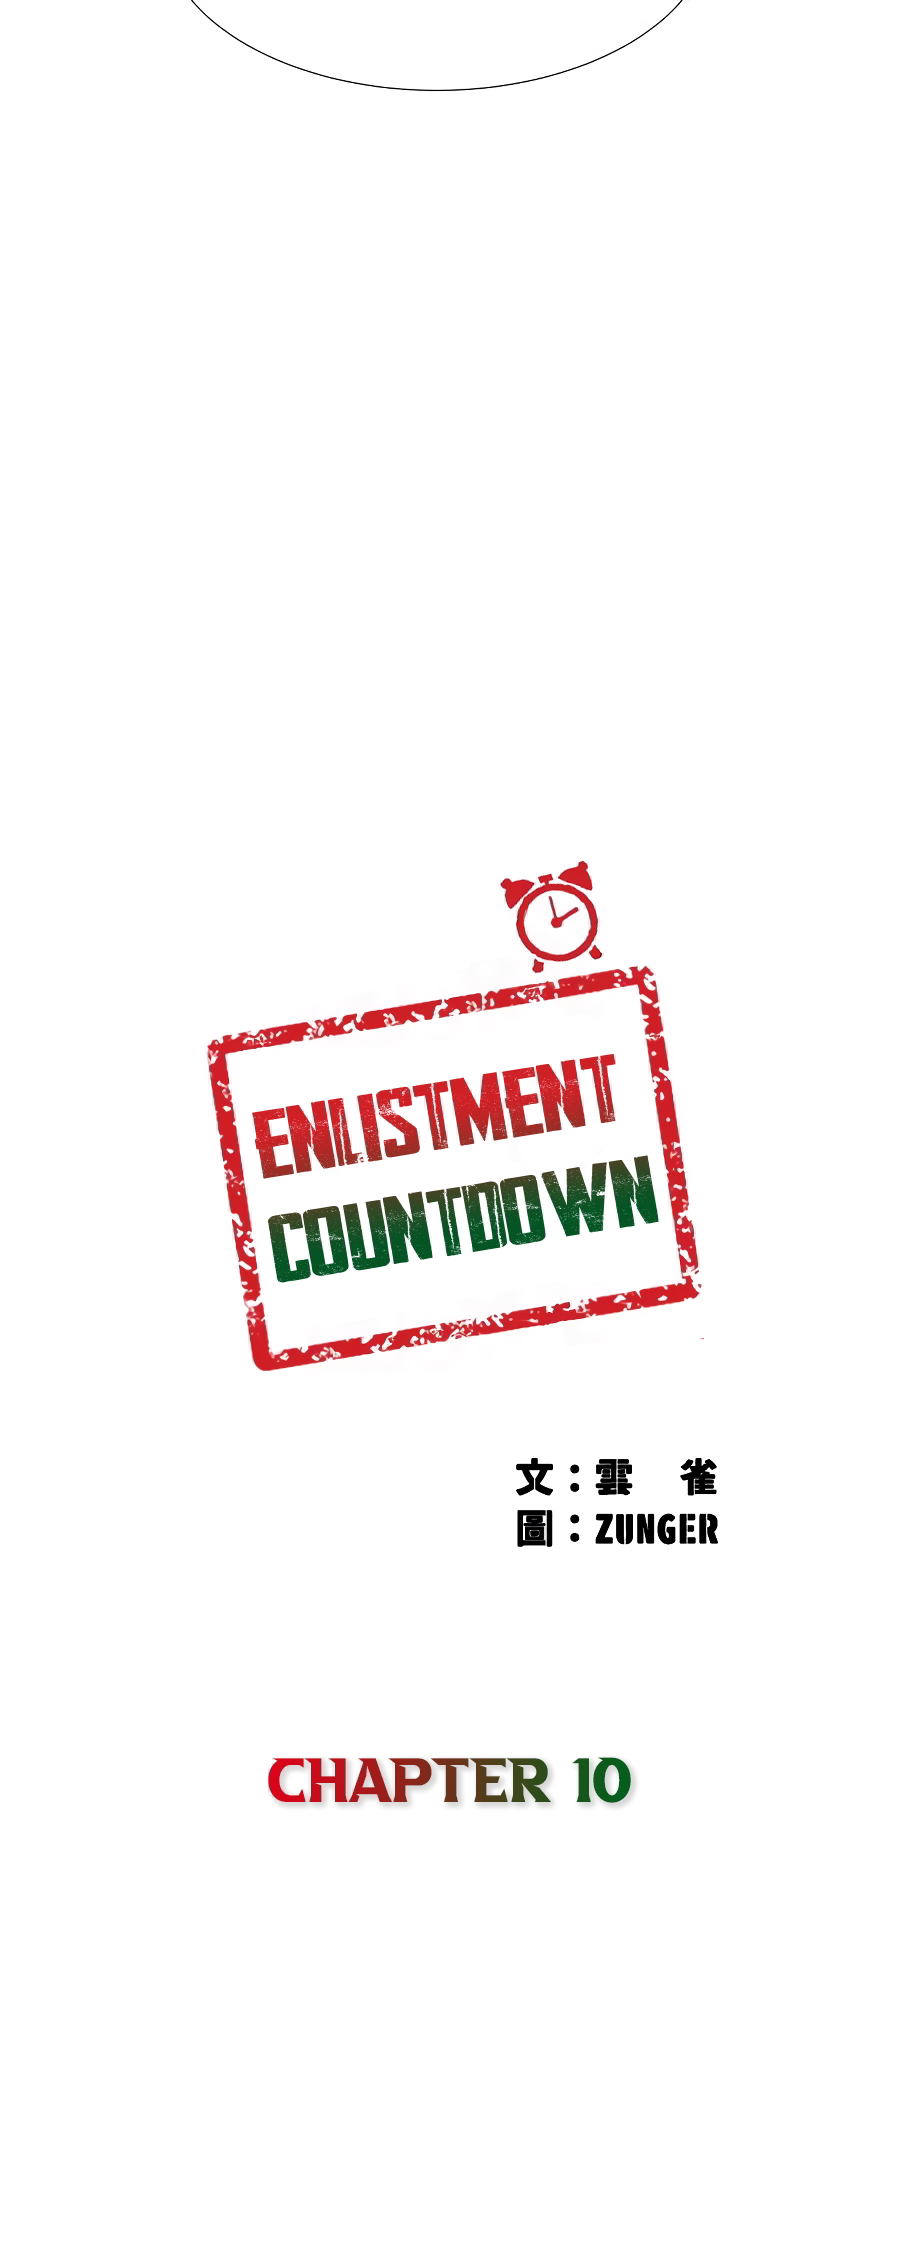 Enlistment Countdown - Page 3